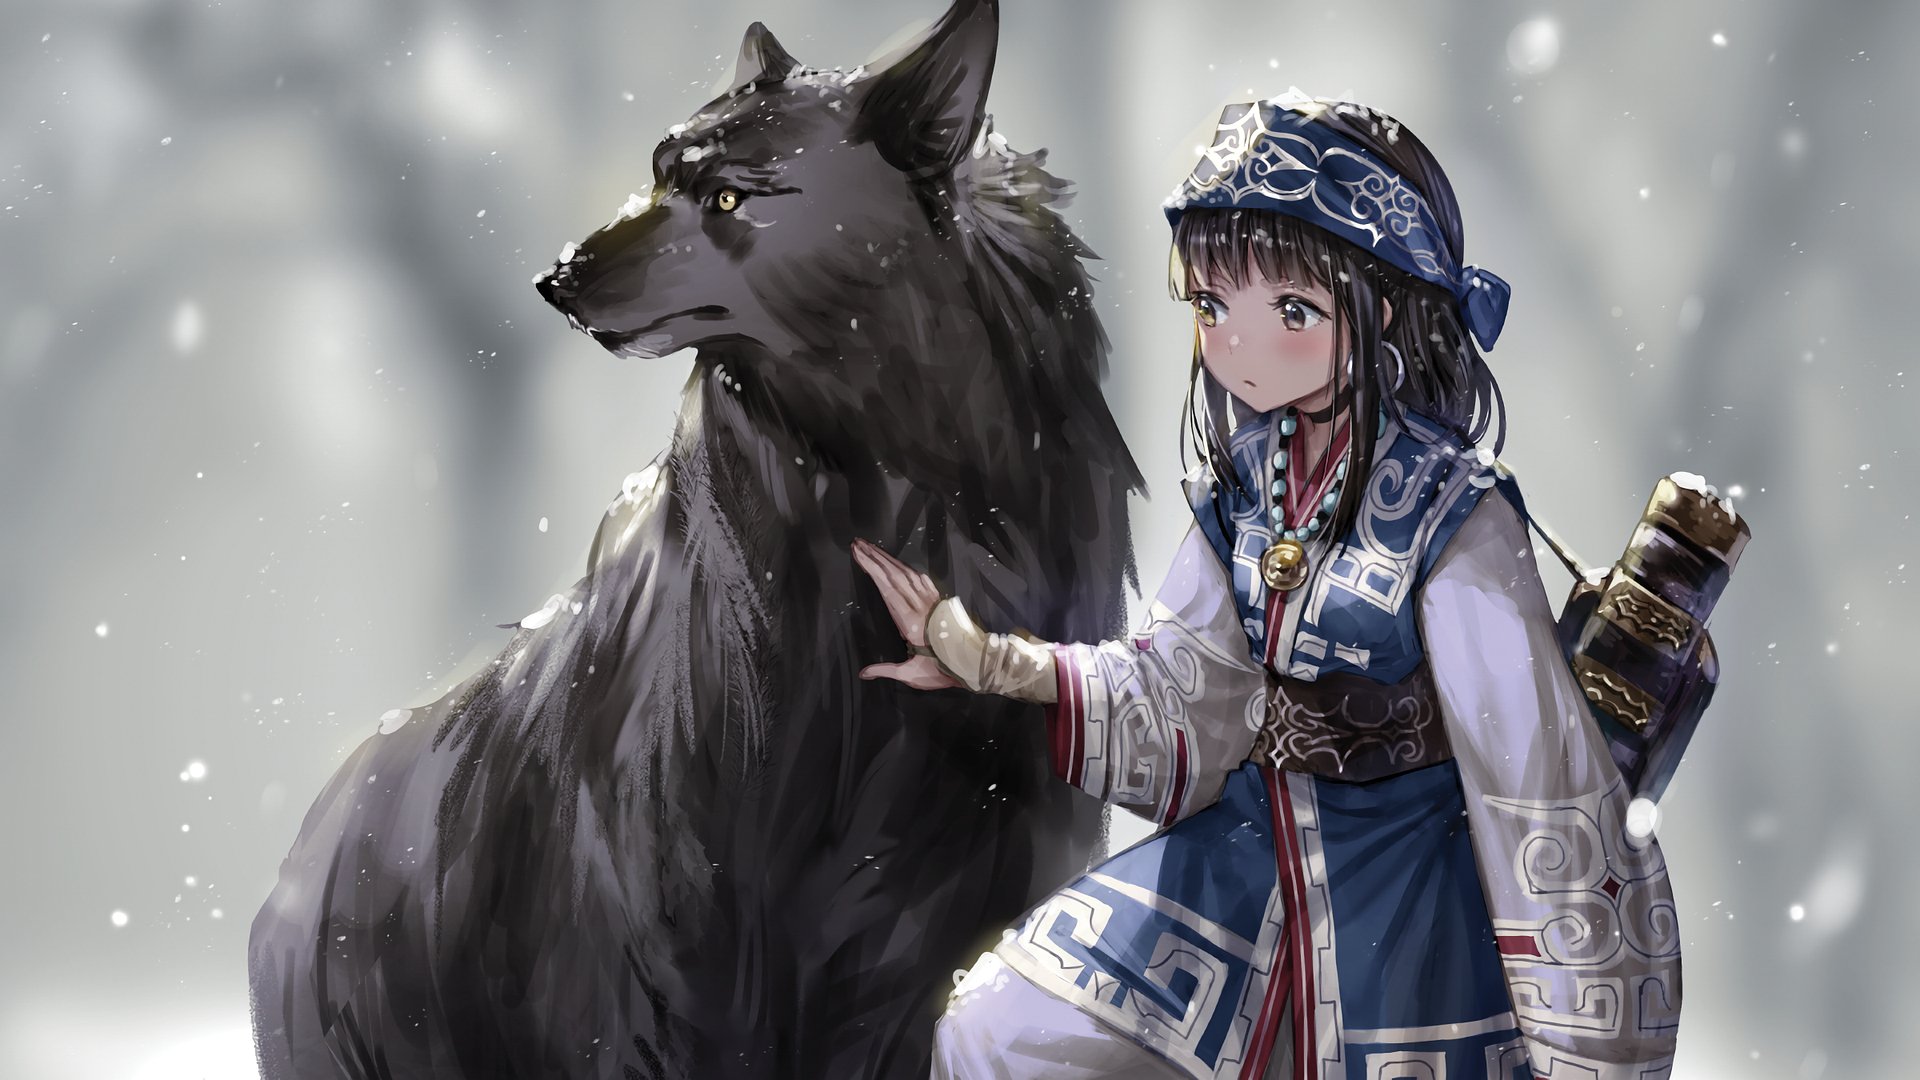 Anime wolf characters